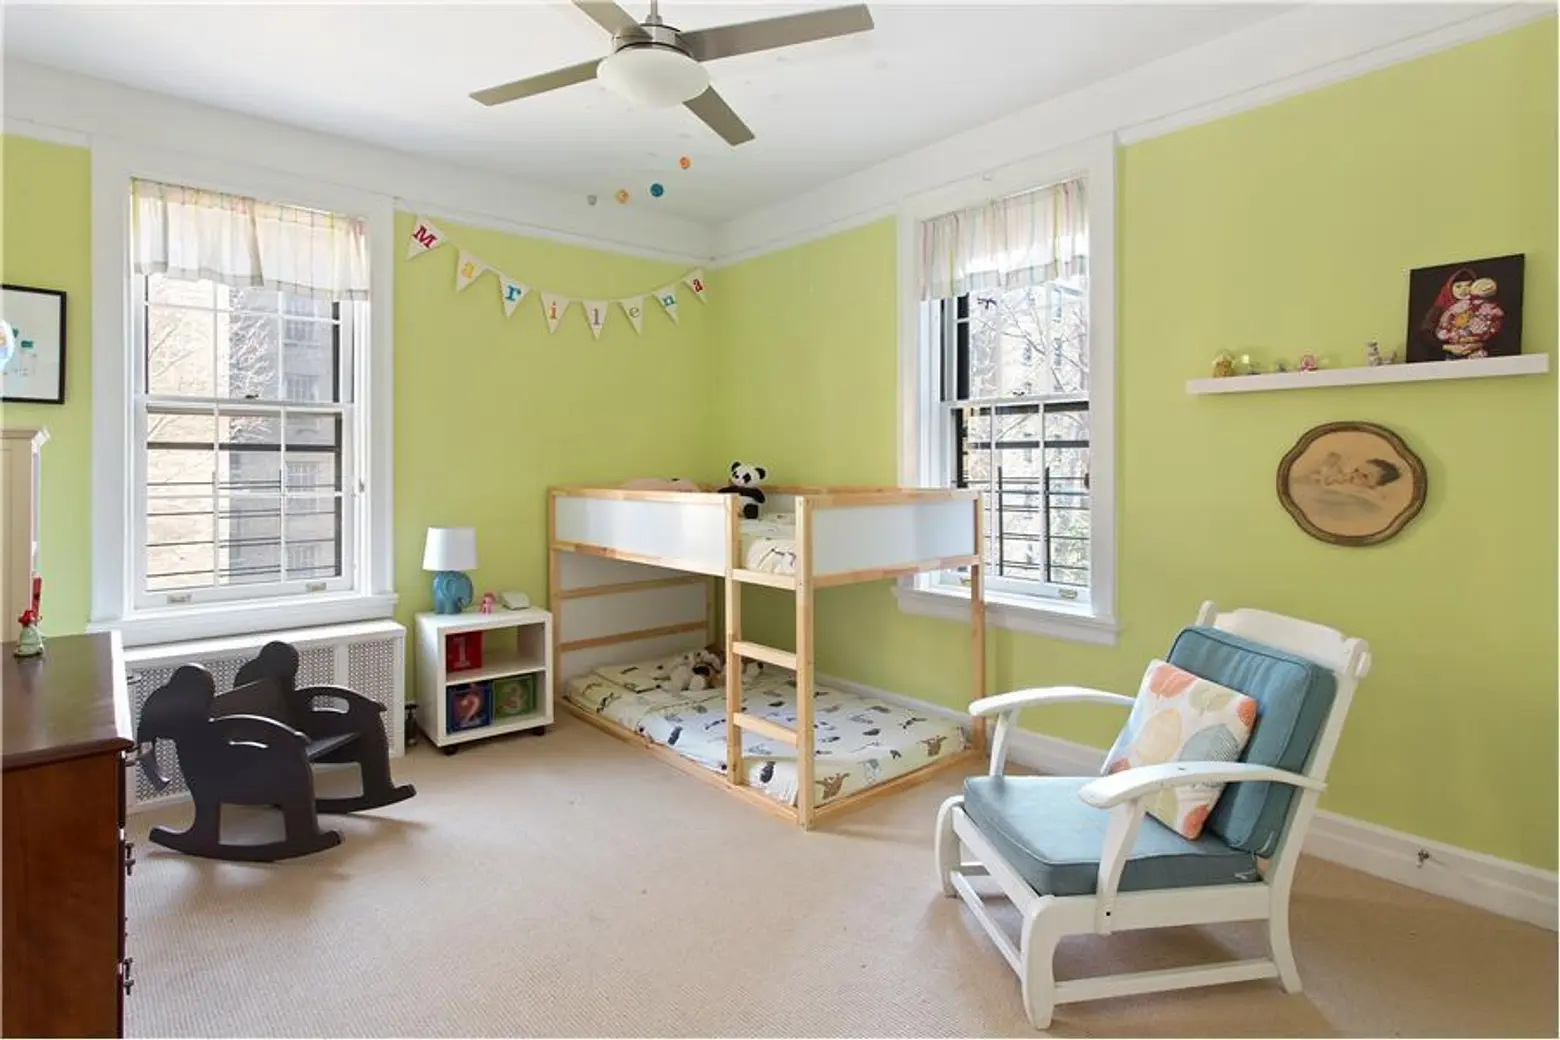 33-27 80th street, co-op, jackson heights, the towers, bedroom